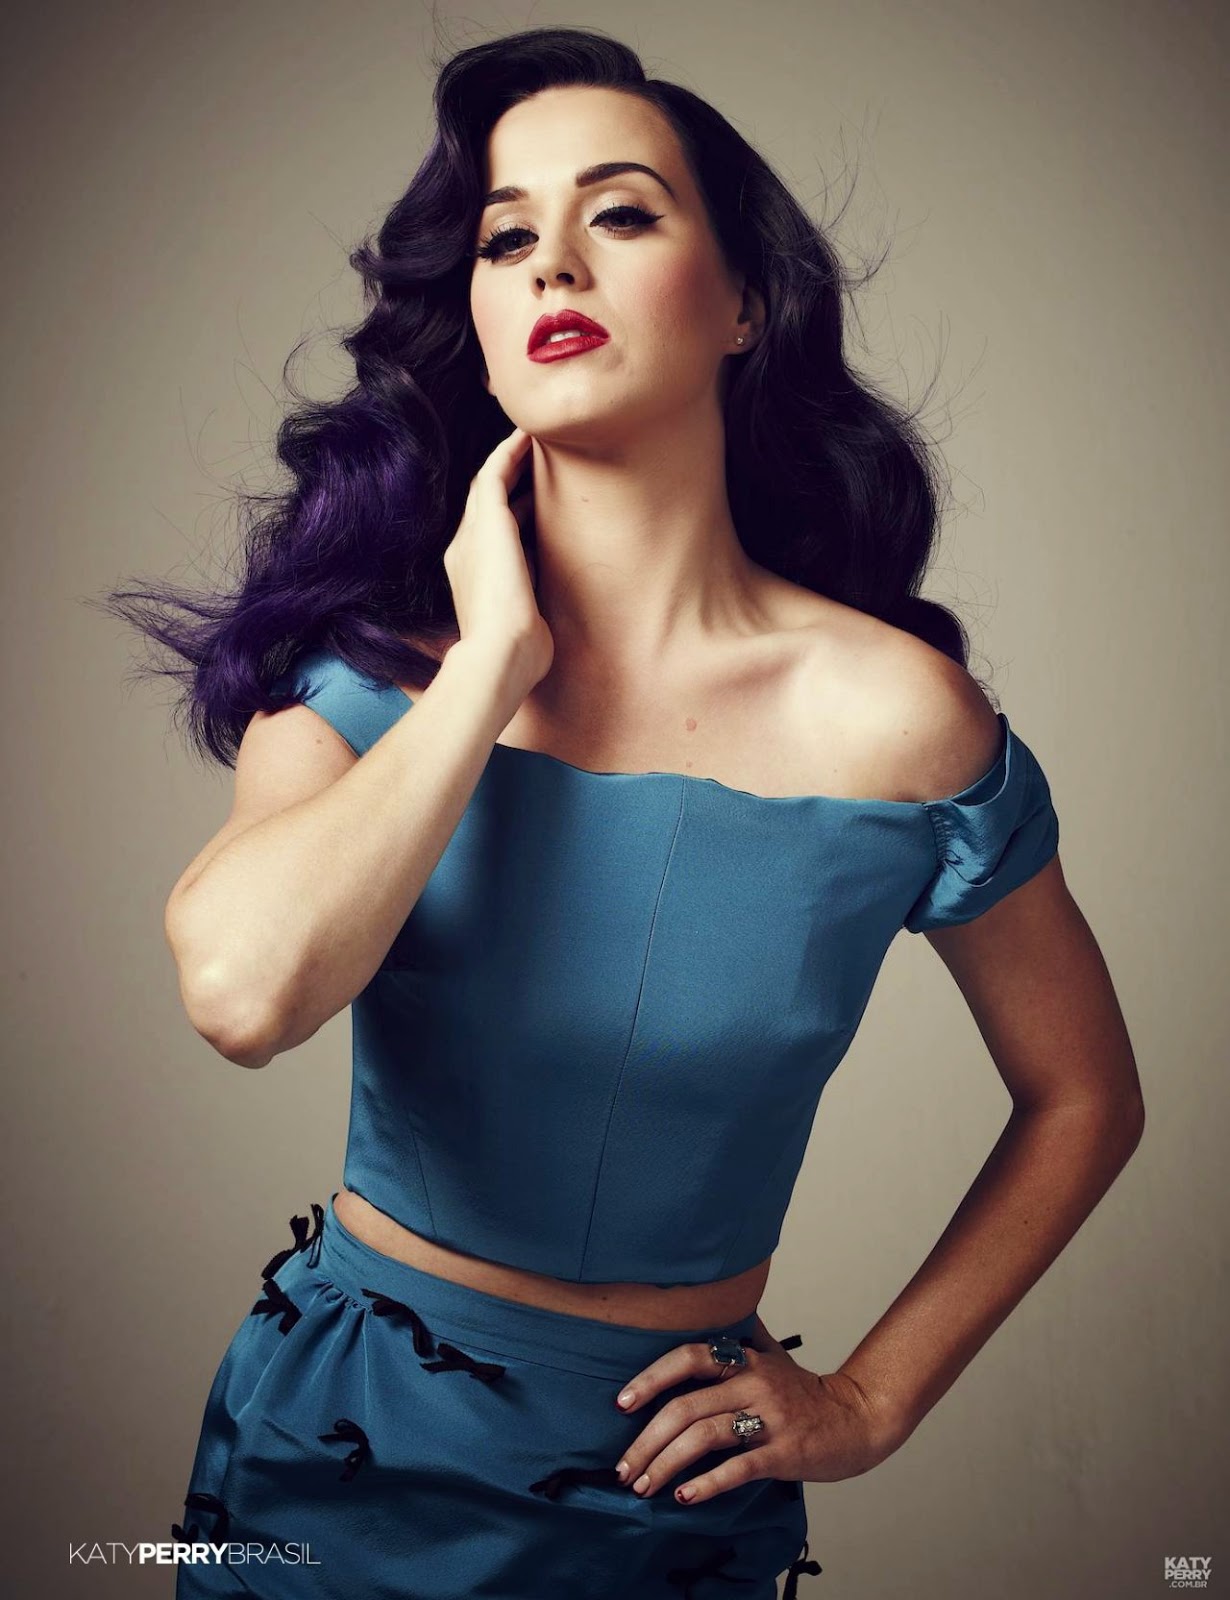 Celebs Galaxy: Katy Perry - Photoshoot for THR